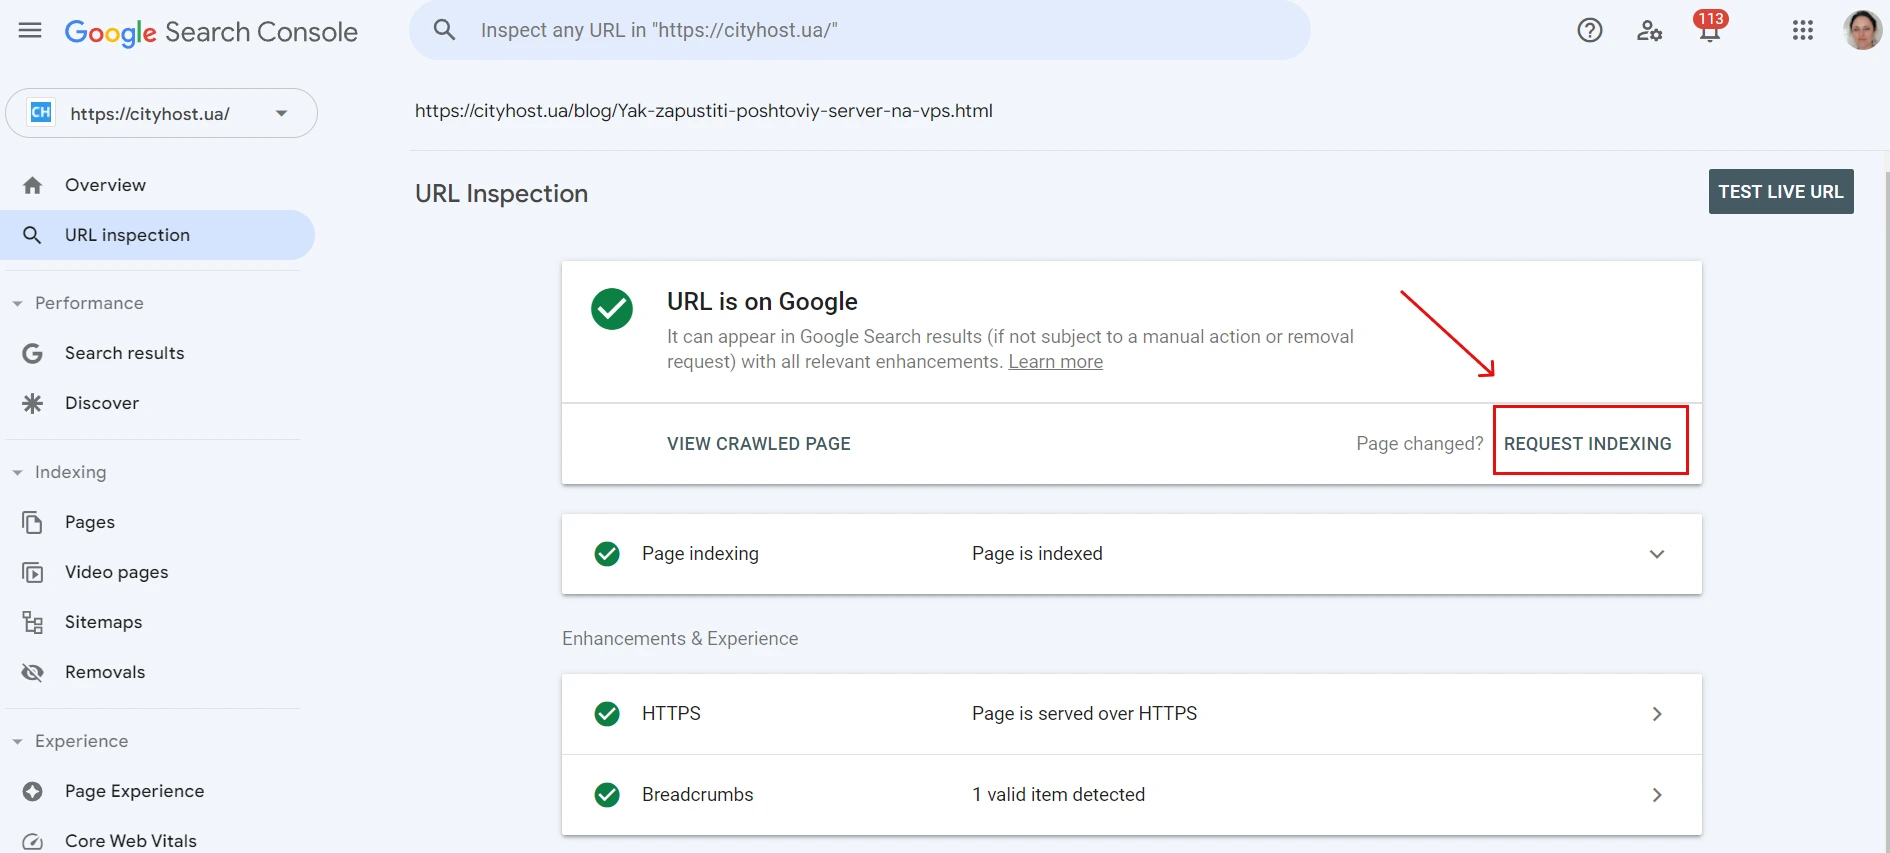 How to request indexing of a site page in Google Search Console